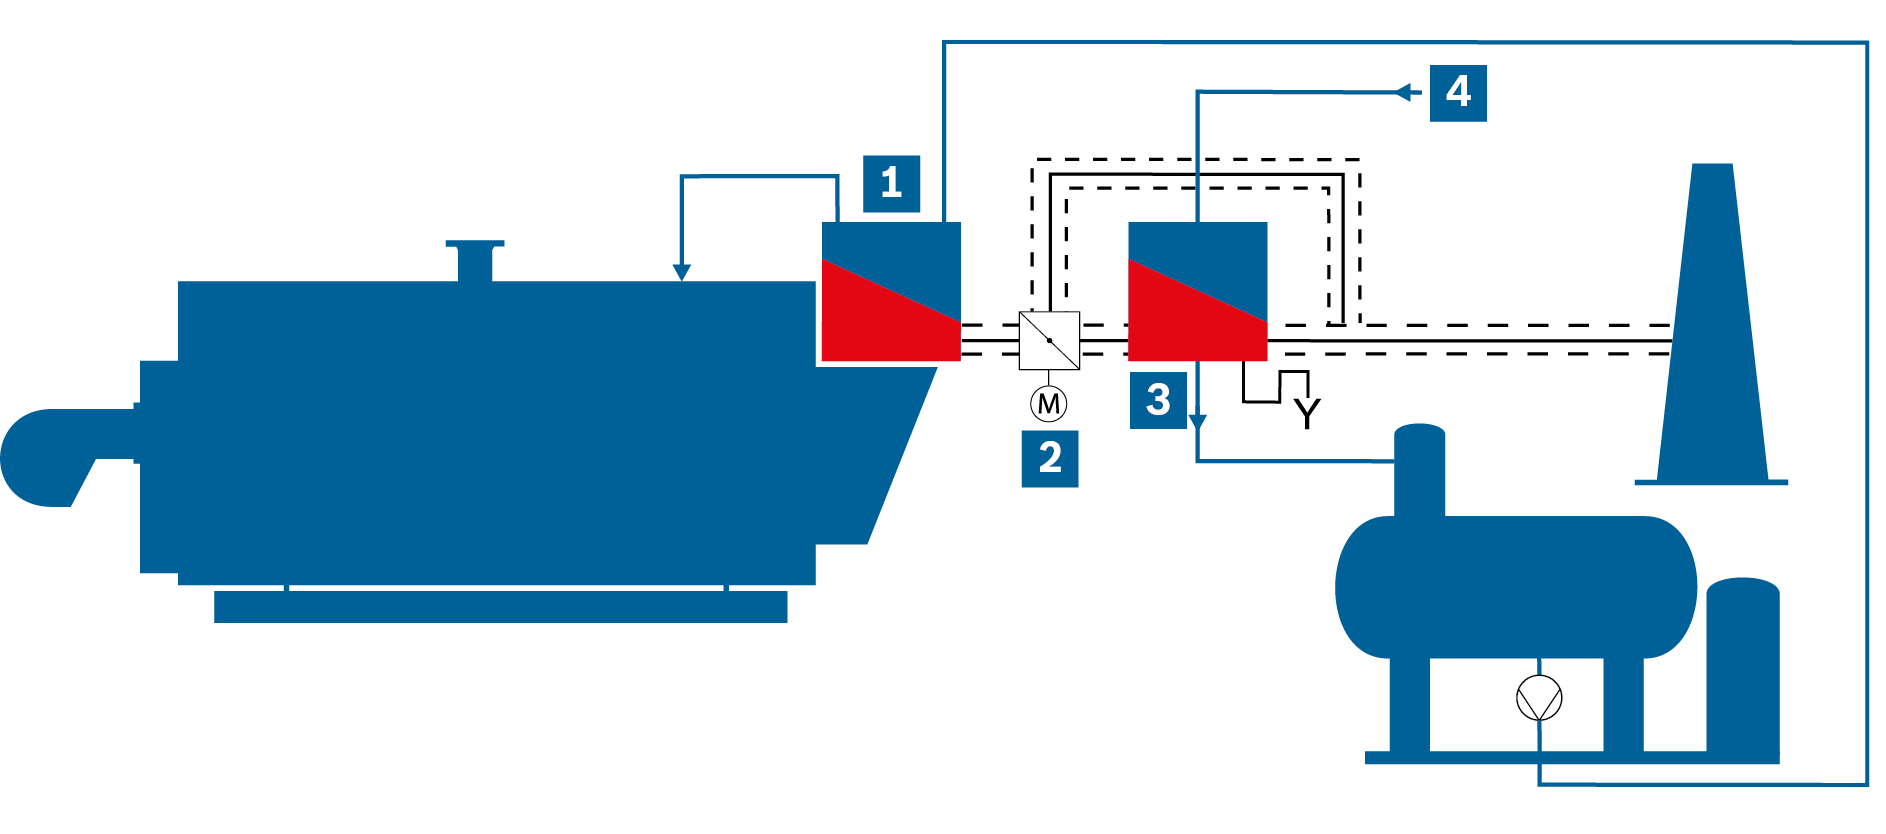 Simplified flow diagram of a steam boiler system with integrated economiser and downstream condensing heat exchanger